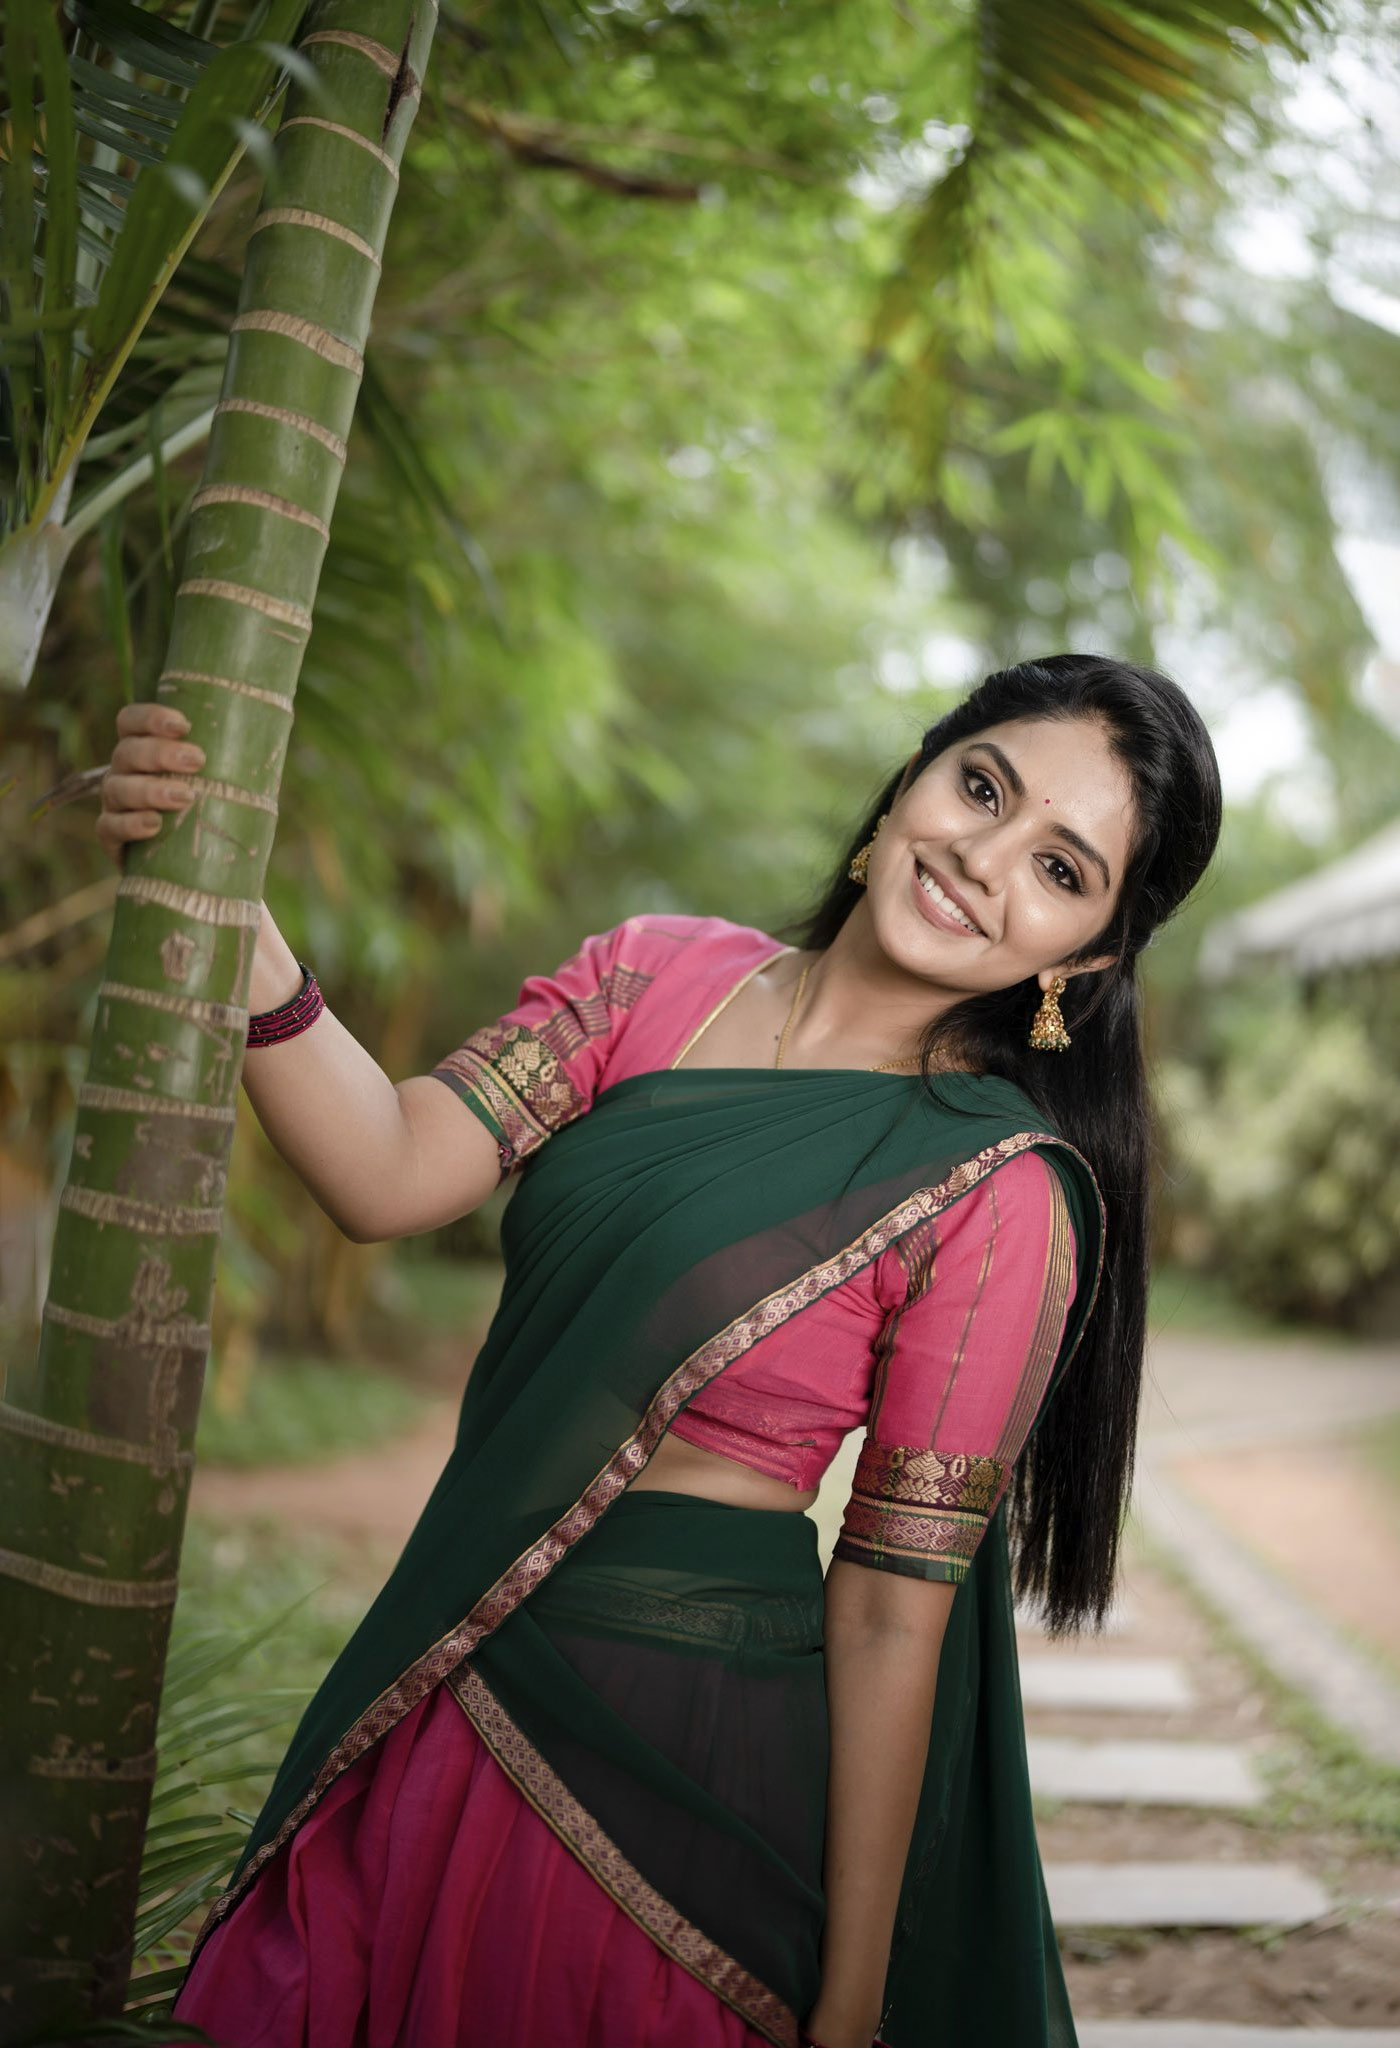 indian beauty in saree wallpaper